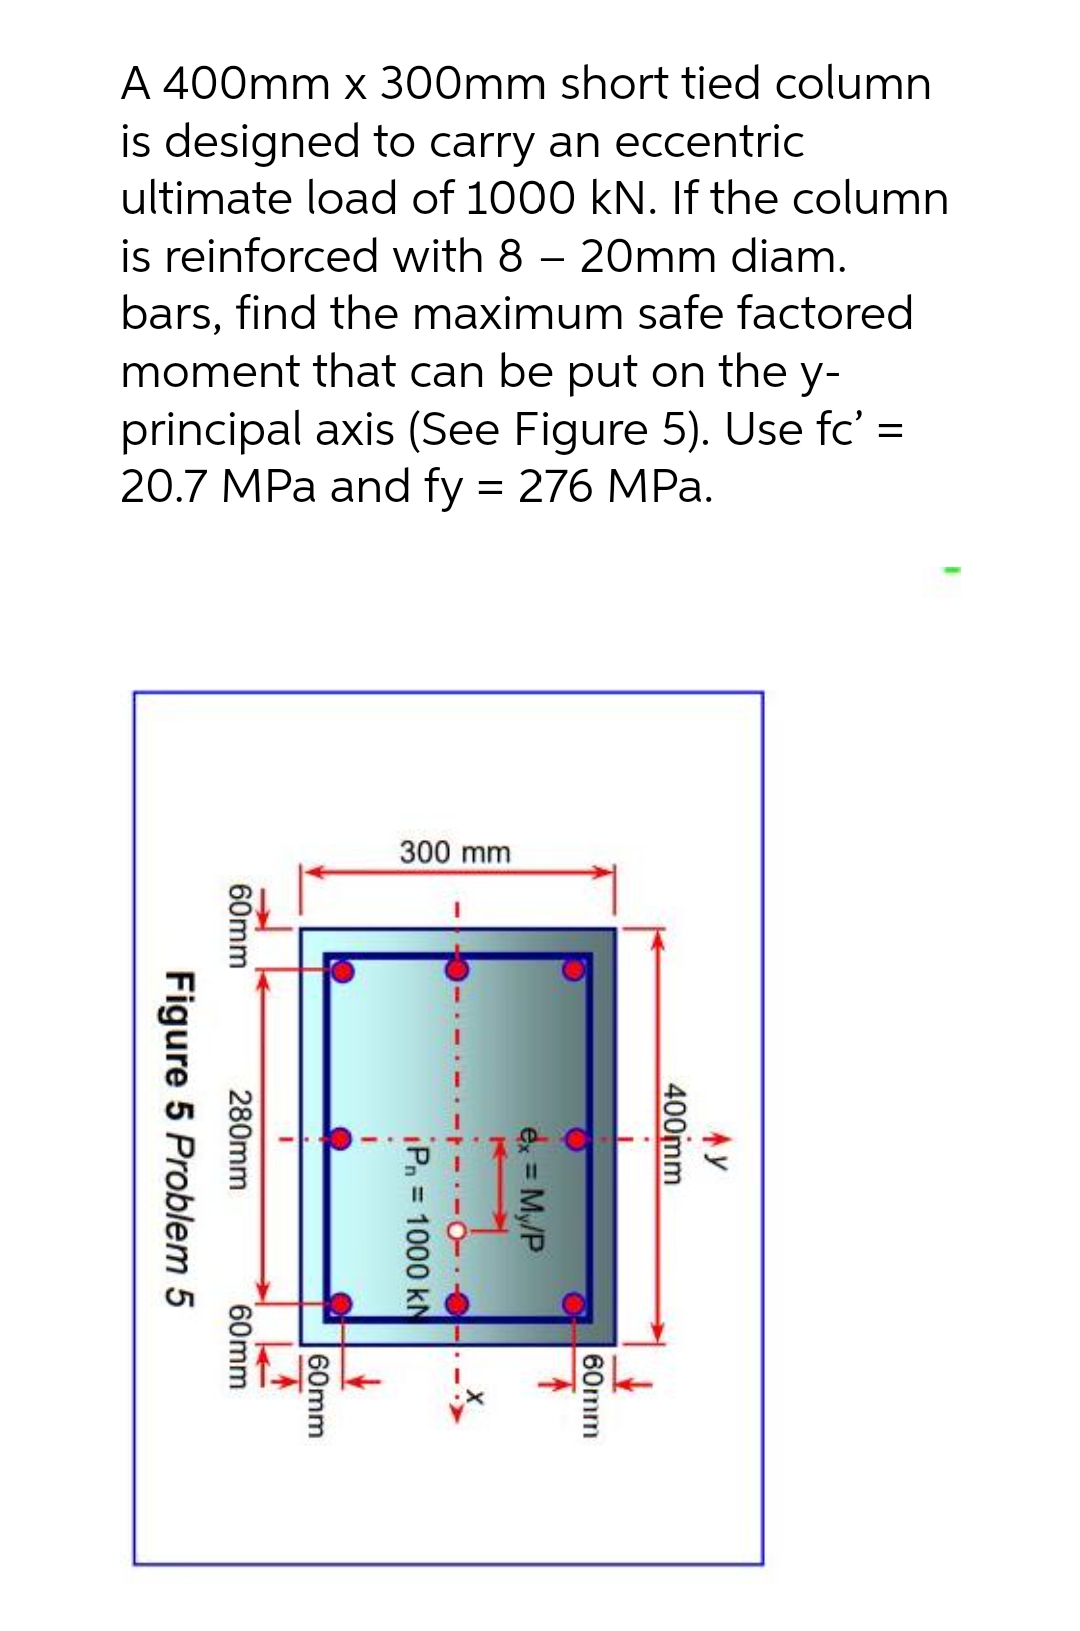 A 400mm x 300mm short tied column
is designed to carry an eccentric
ultimate load of 1000 kN. If the column
is reinforced with 8 - 20mm diam.
bars, find the maximum safe factored
moment that can be put on the y-
principal axis (See Figure 5). Use fc' =
20.7 MPa and fy = 276 MPa.
300 mm
60mm
Figure 5 Problem 5
280mm
I
Pn= 1000 kN
60mm
60mm
ex = My/P
60mm
400mm
Ay